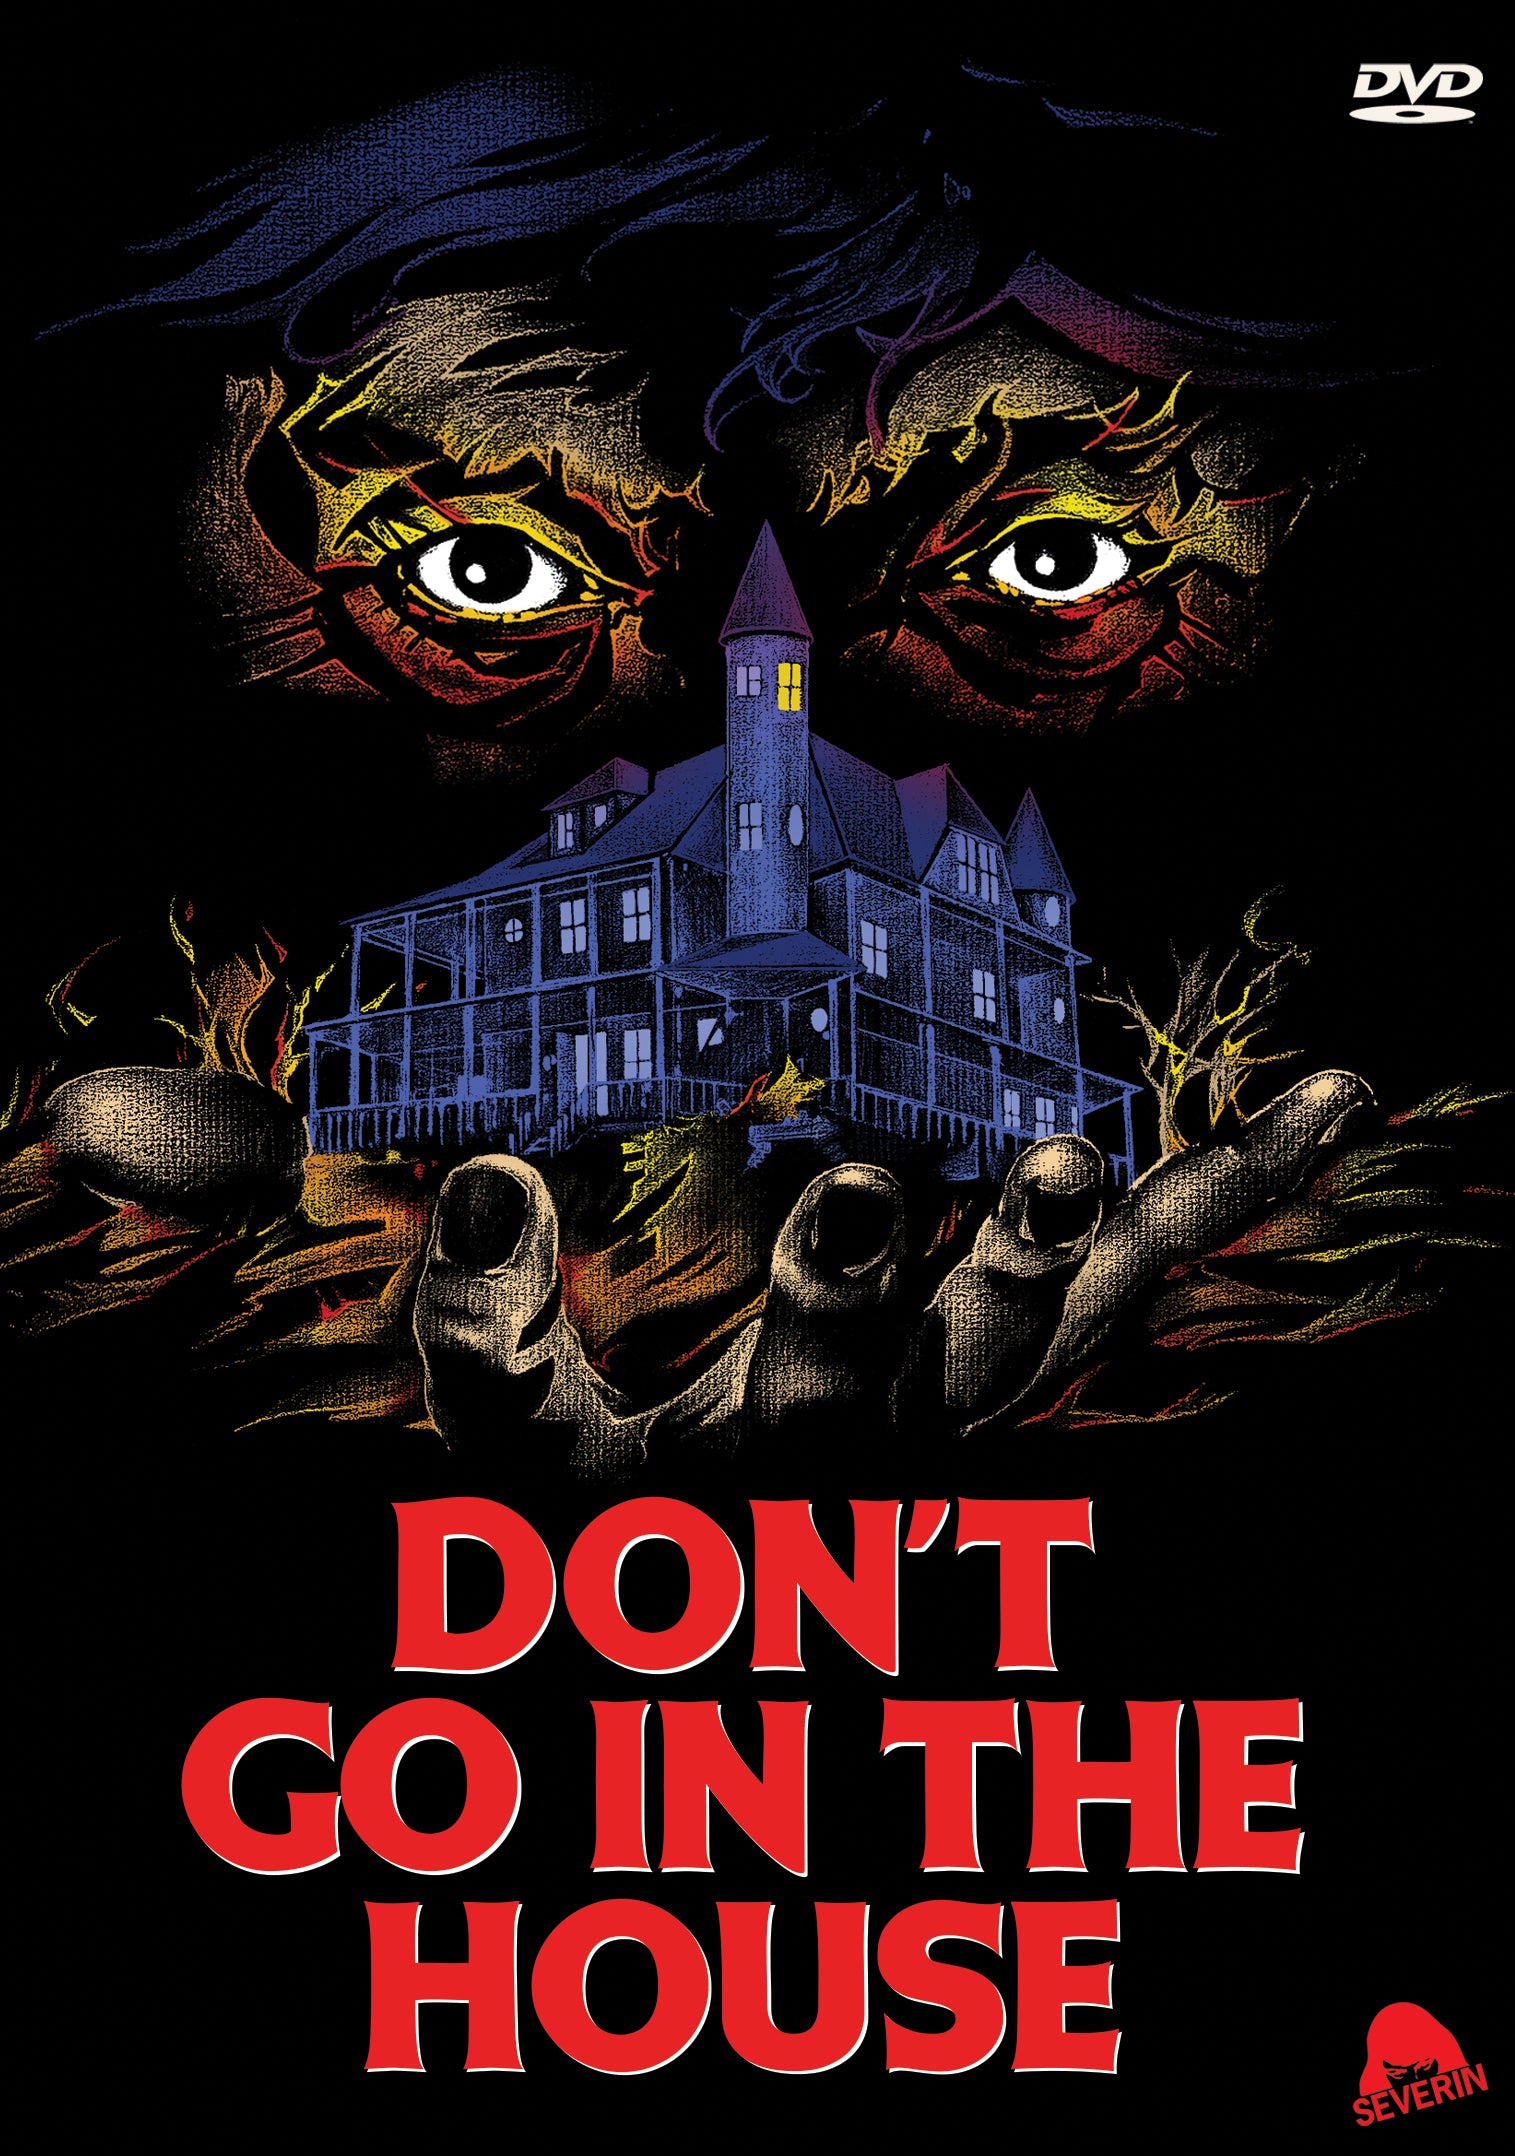 DON'T GO IN THE HOUSE DVD